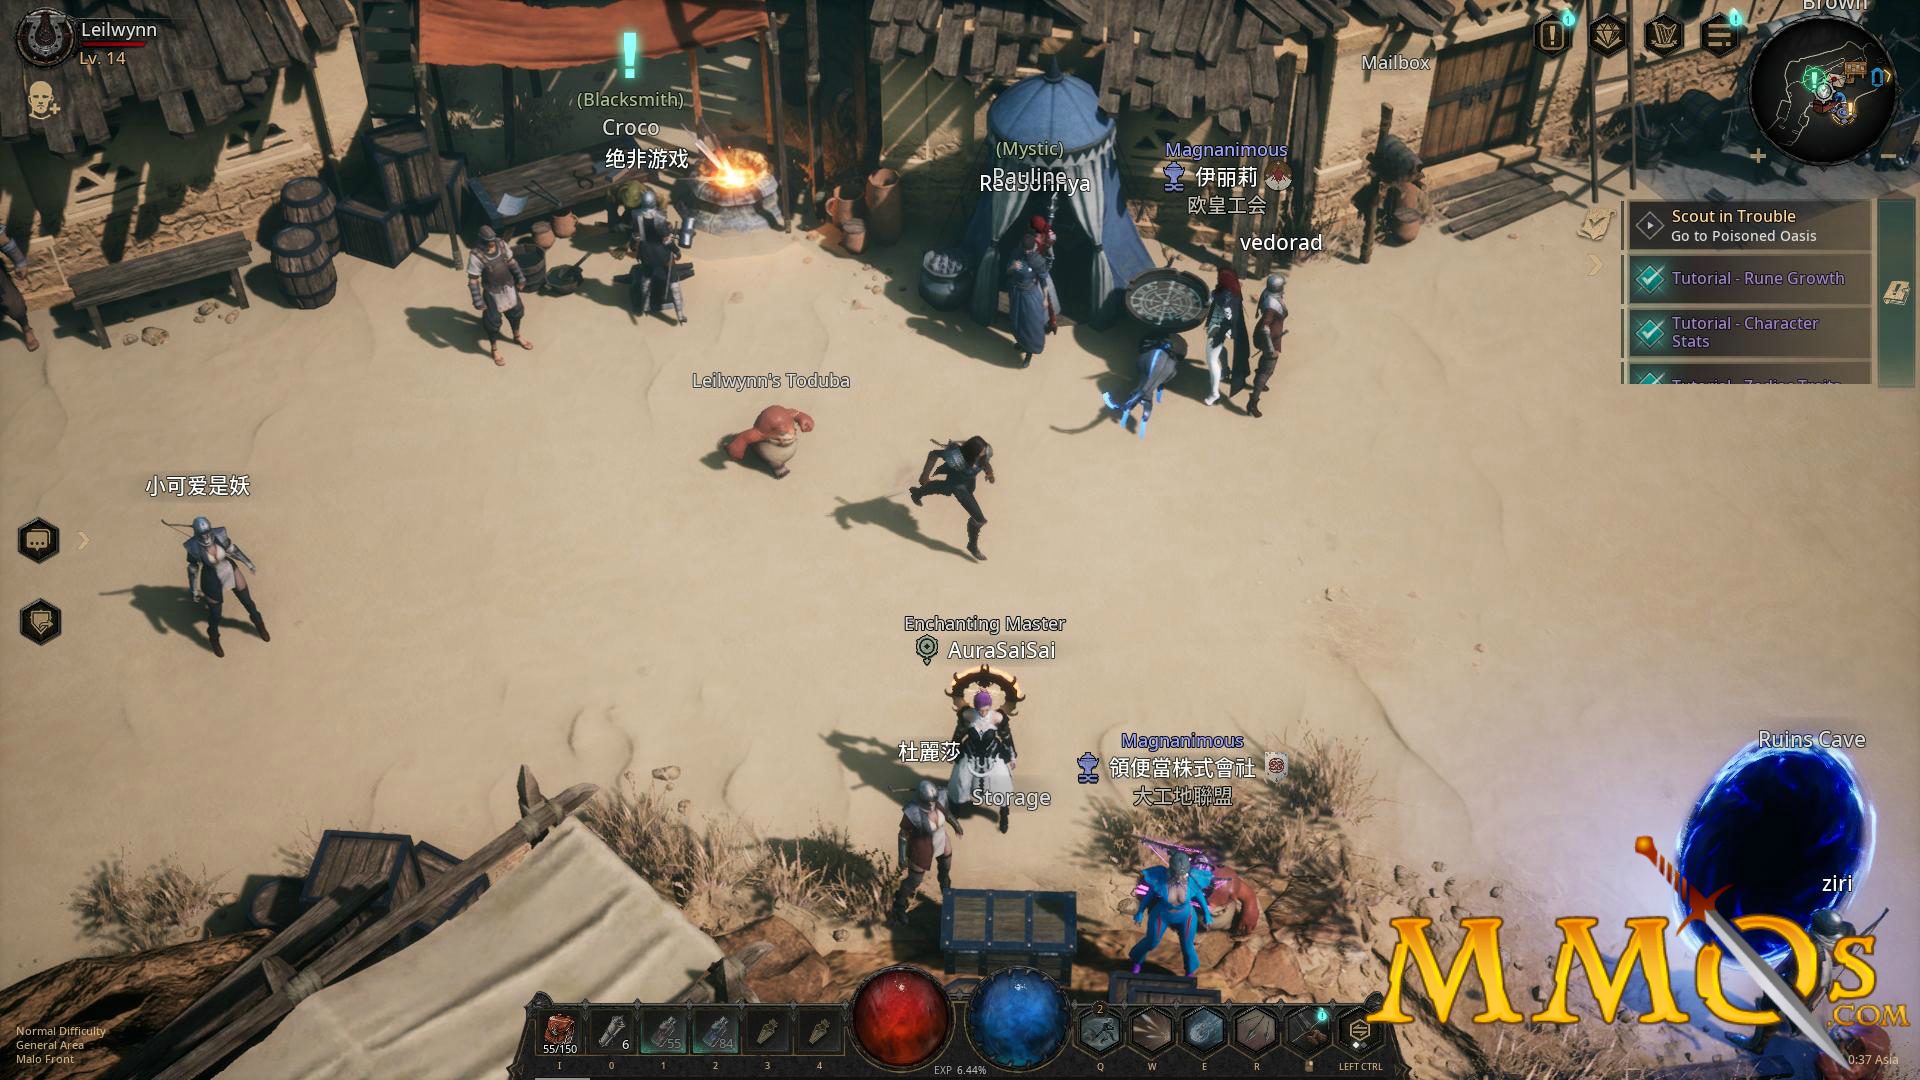 Check Out Our First Impressions of Cross-Platform ARPG Undecember